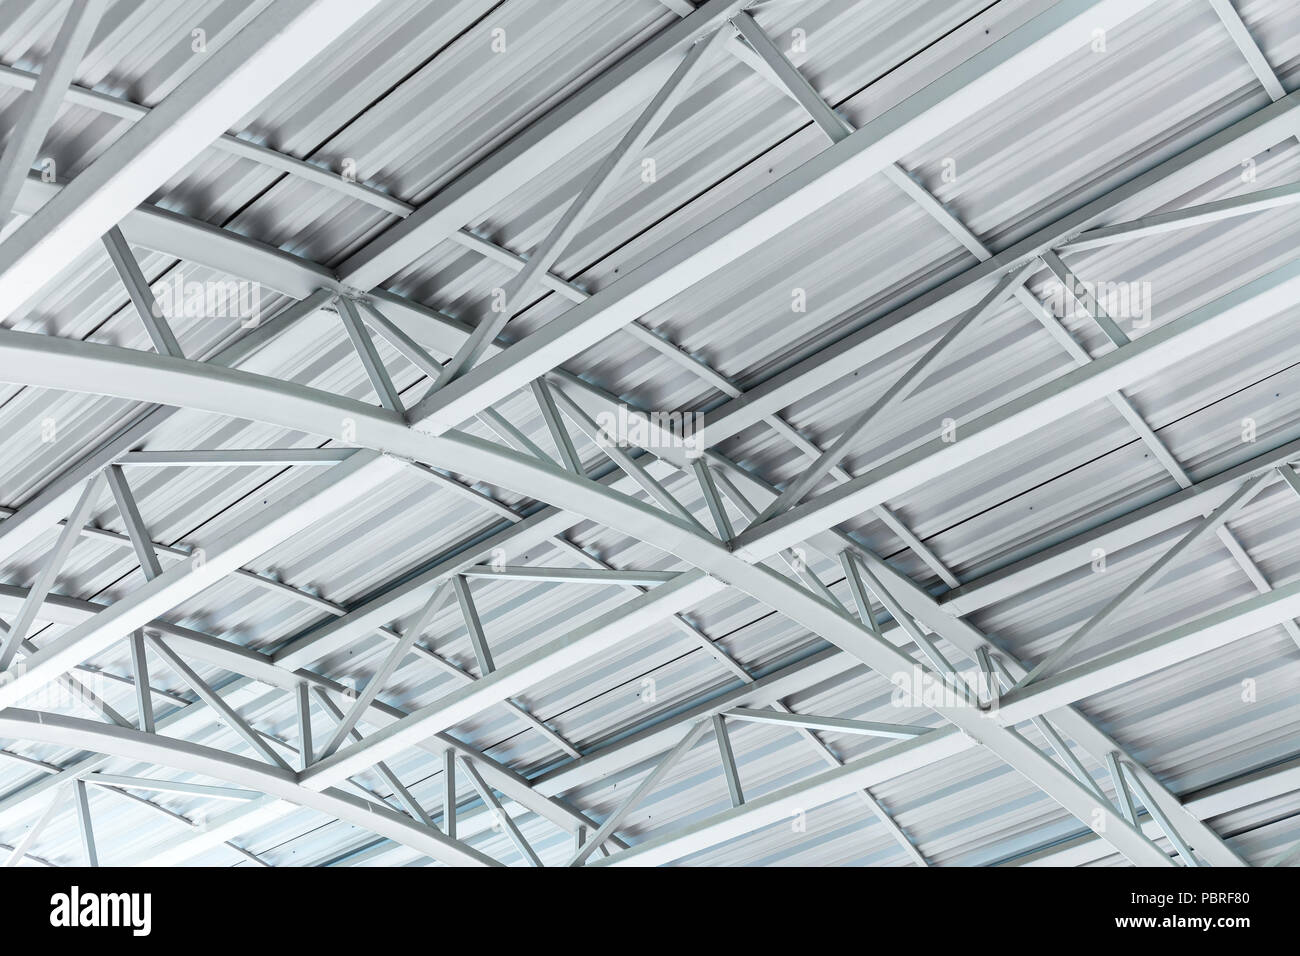 arched metal sheet roof with steel truss structure Stock Photo